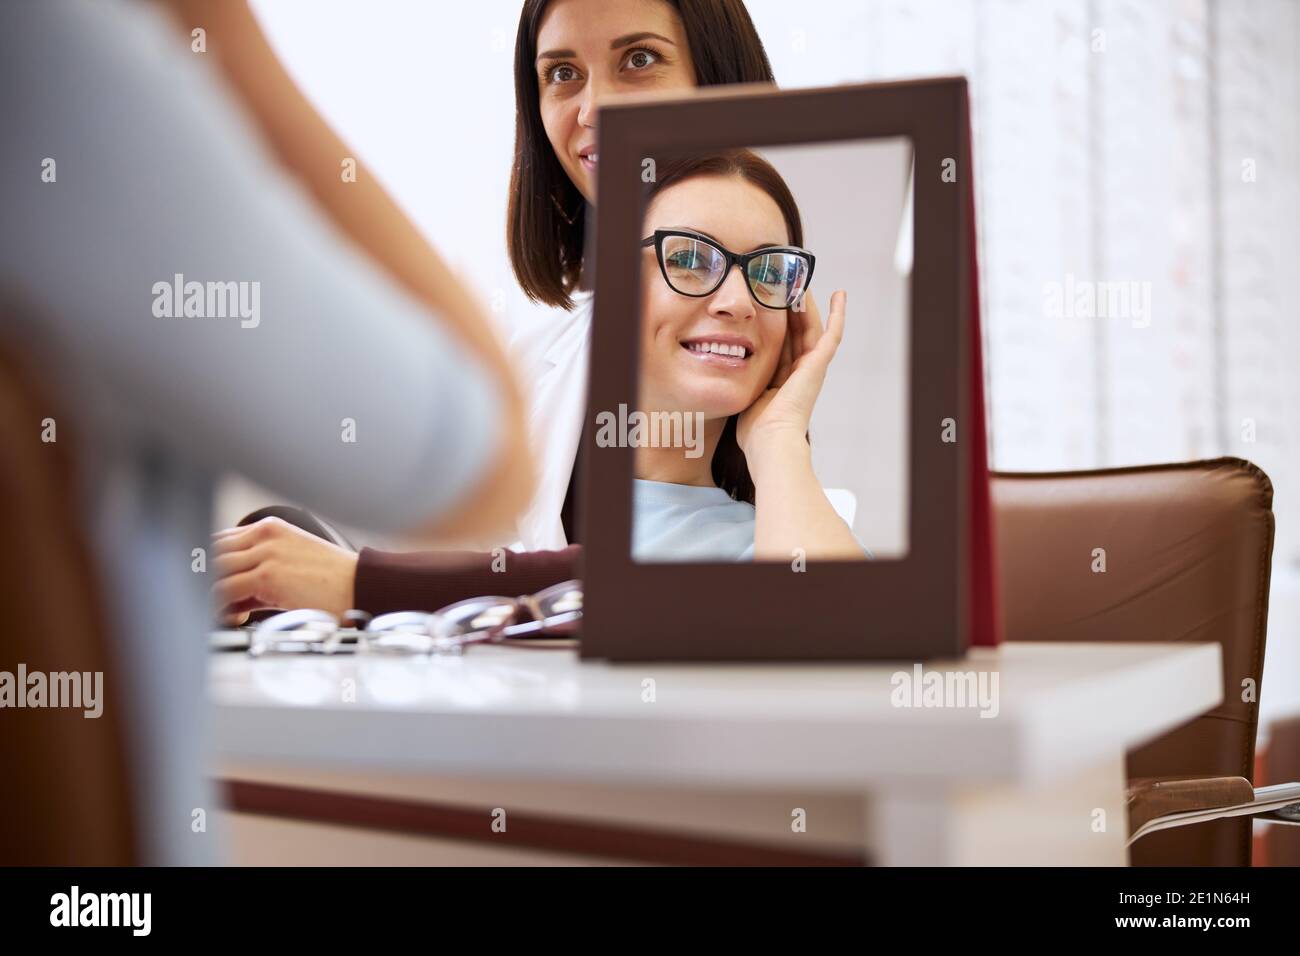 Customer adoring her appearance with fashionable glasses Stock Photo